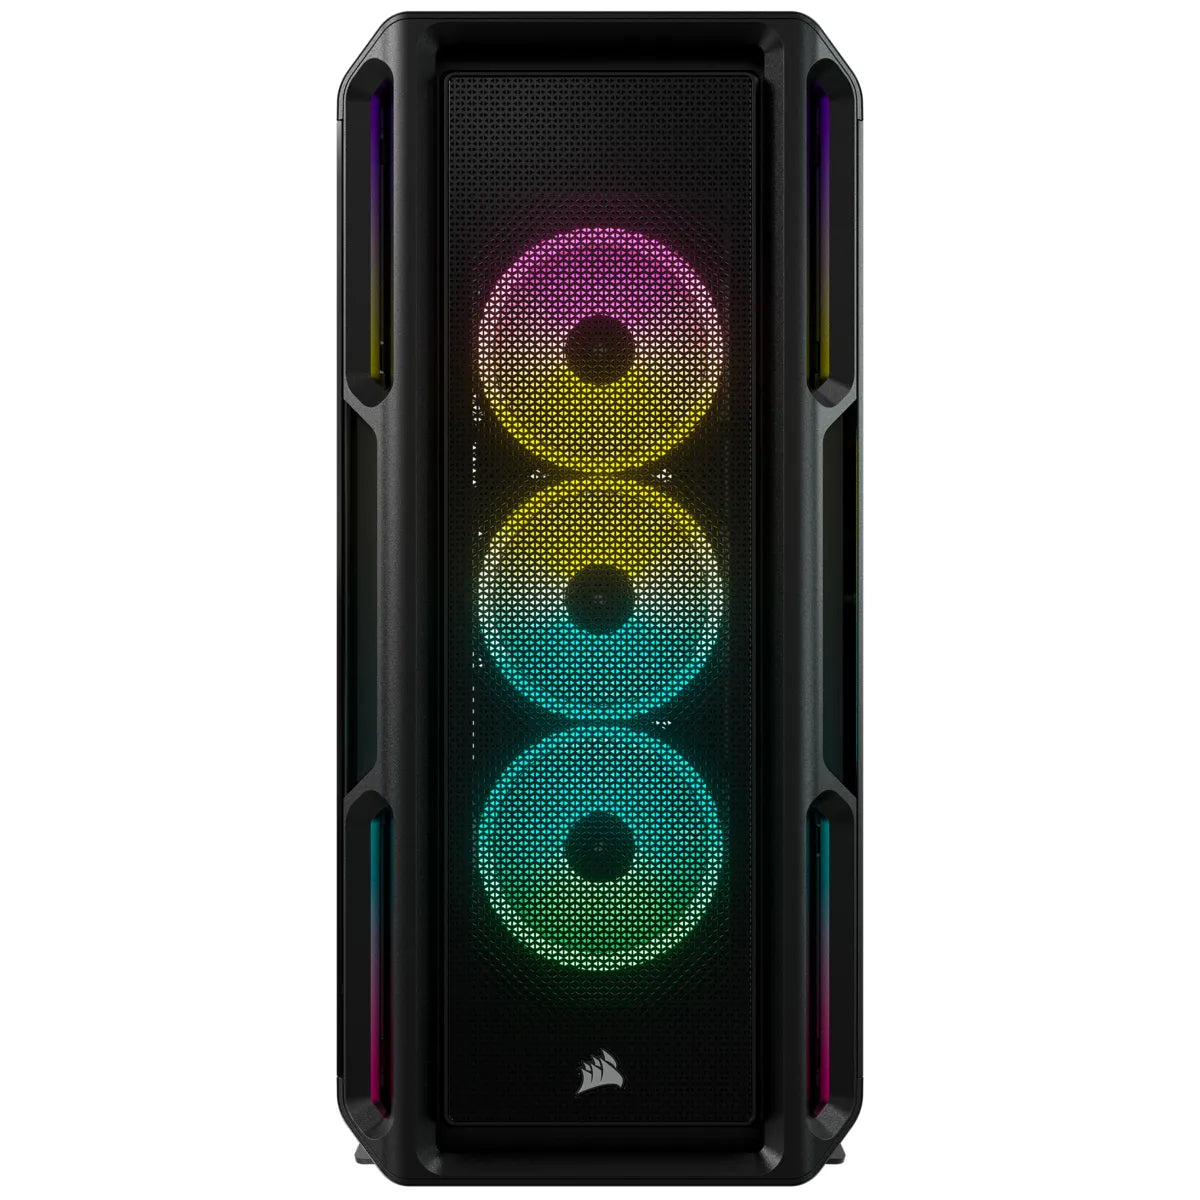 iCUE-5000T-Tempered-Glass-Mid-Tower;-Black